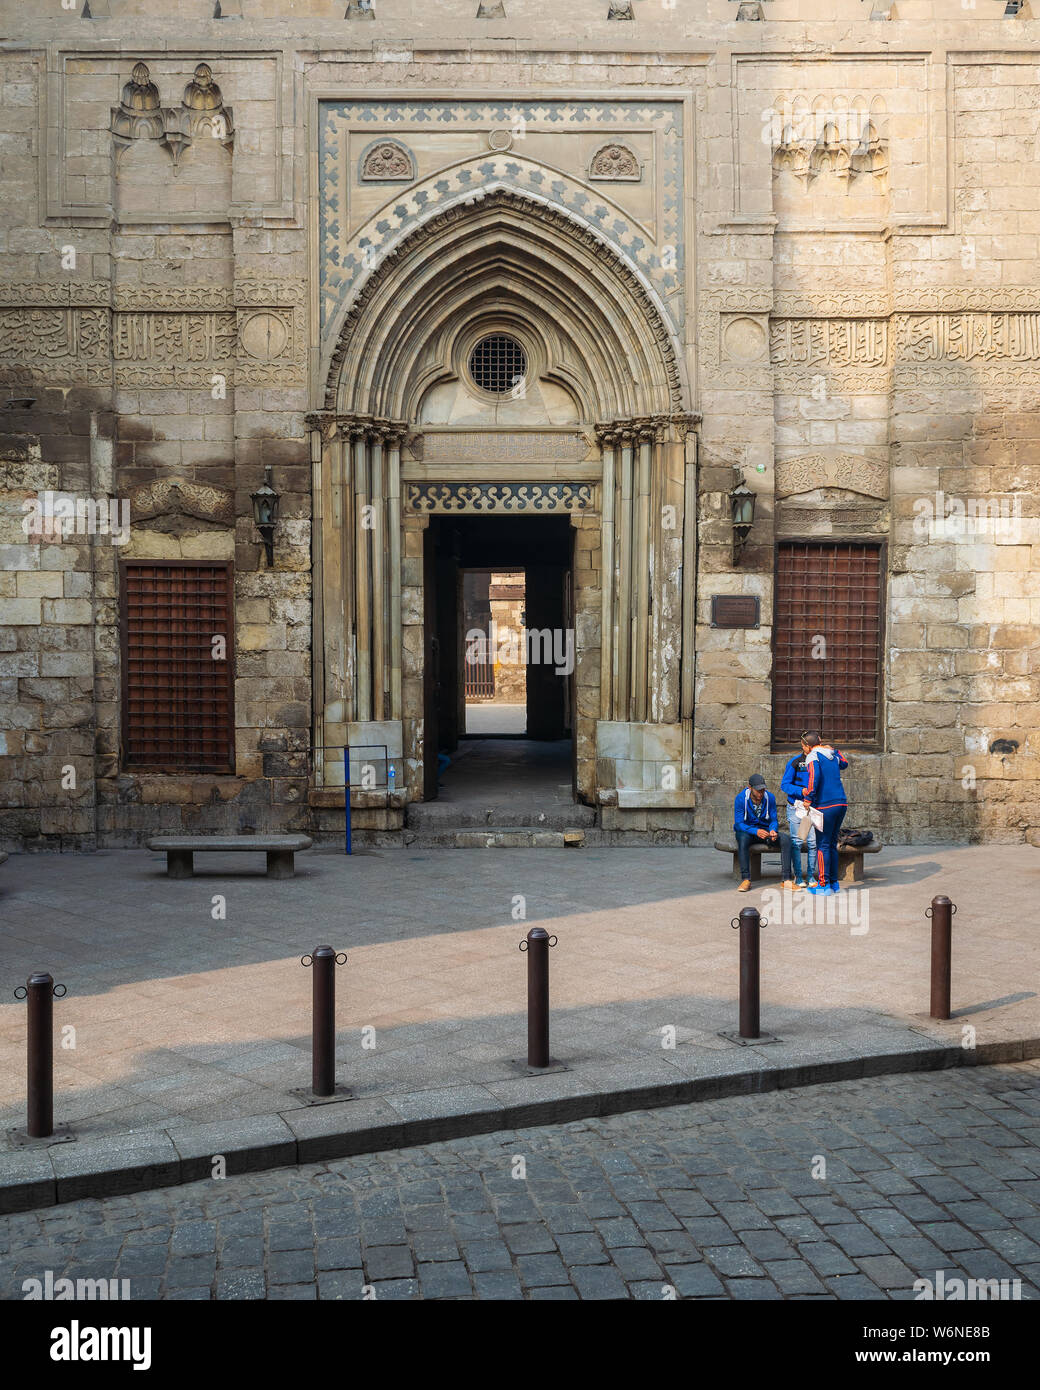 Cairo, Egypt- December 12 2015: Entrance of theological school and Mausoleum of Sultan Qalawun, Moez Street Stock Photo